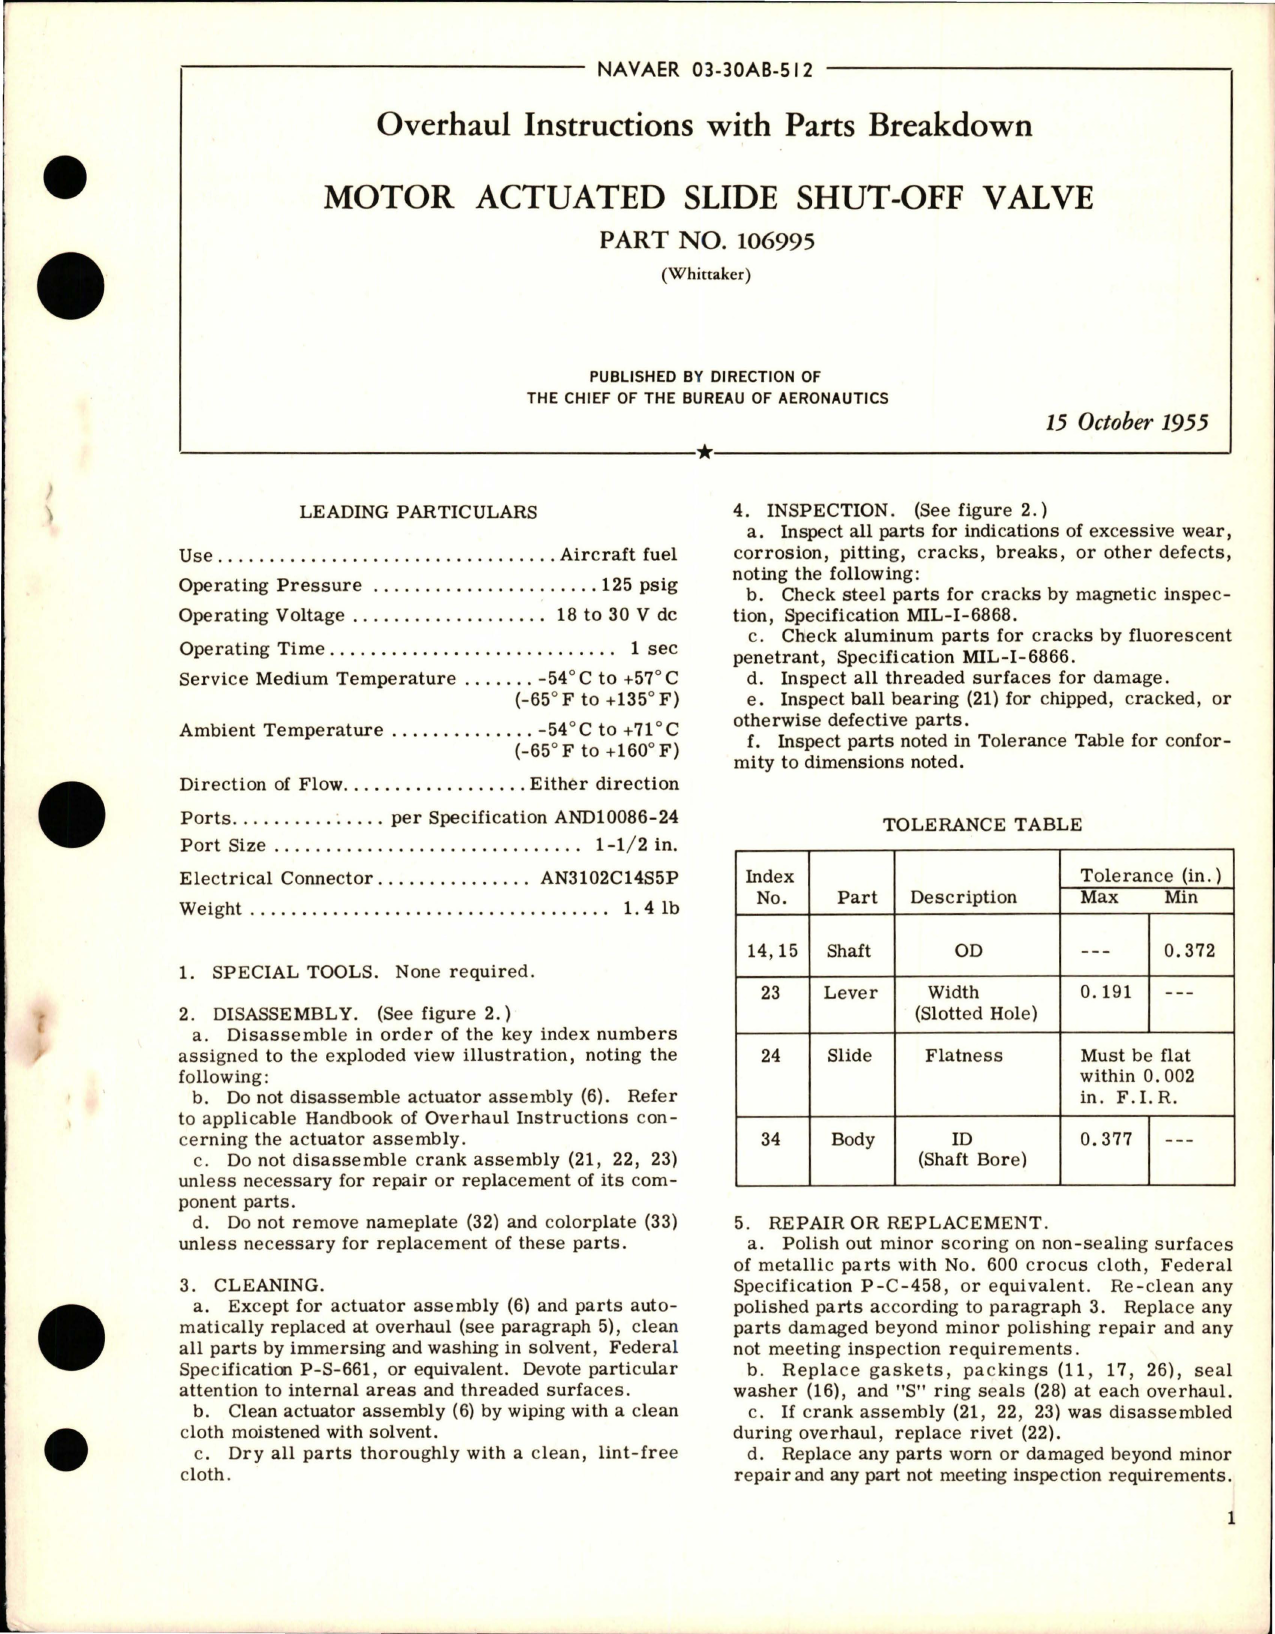 Sample page 1 from AirCorps Library document: Overhaul Instructions with Parts Breakdown for Motor Actuated Slide Shut-Off Valve - Part 106995